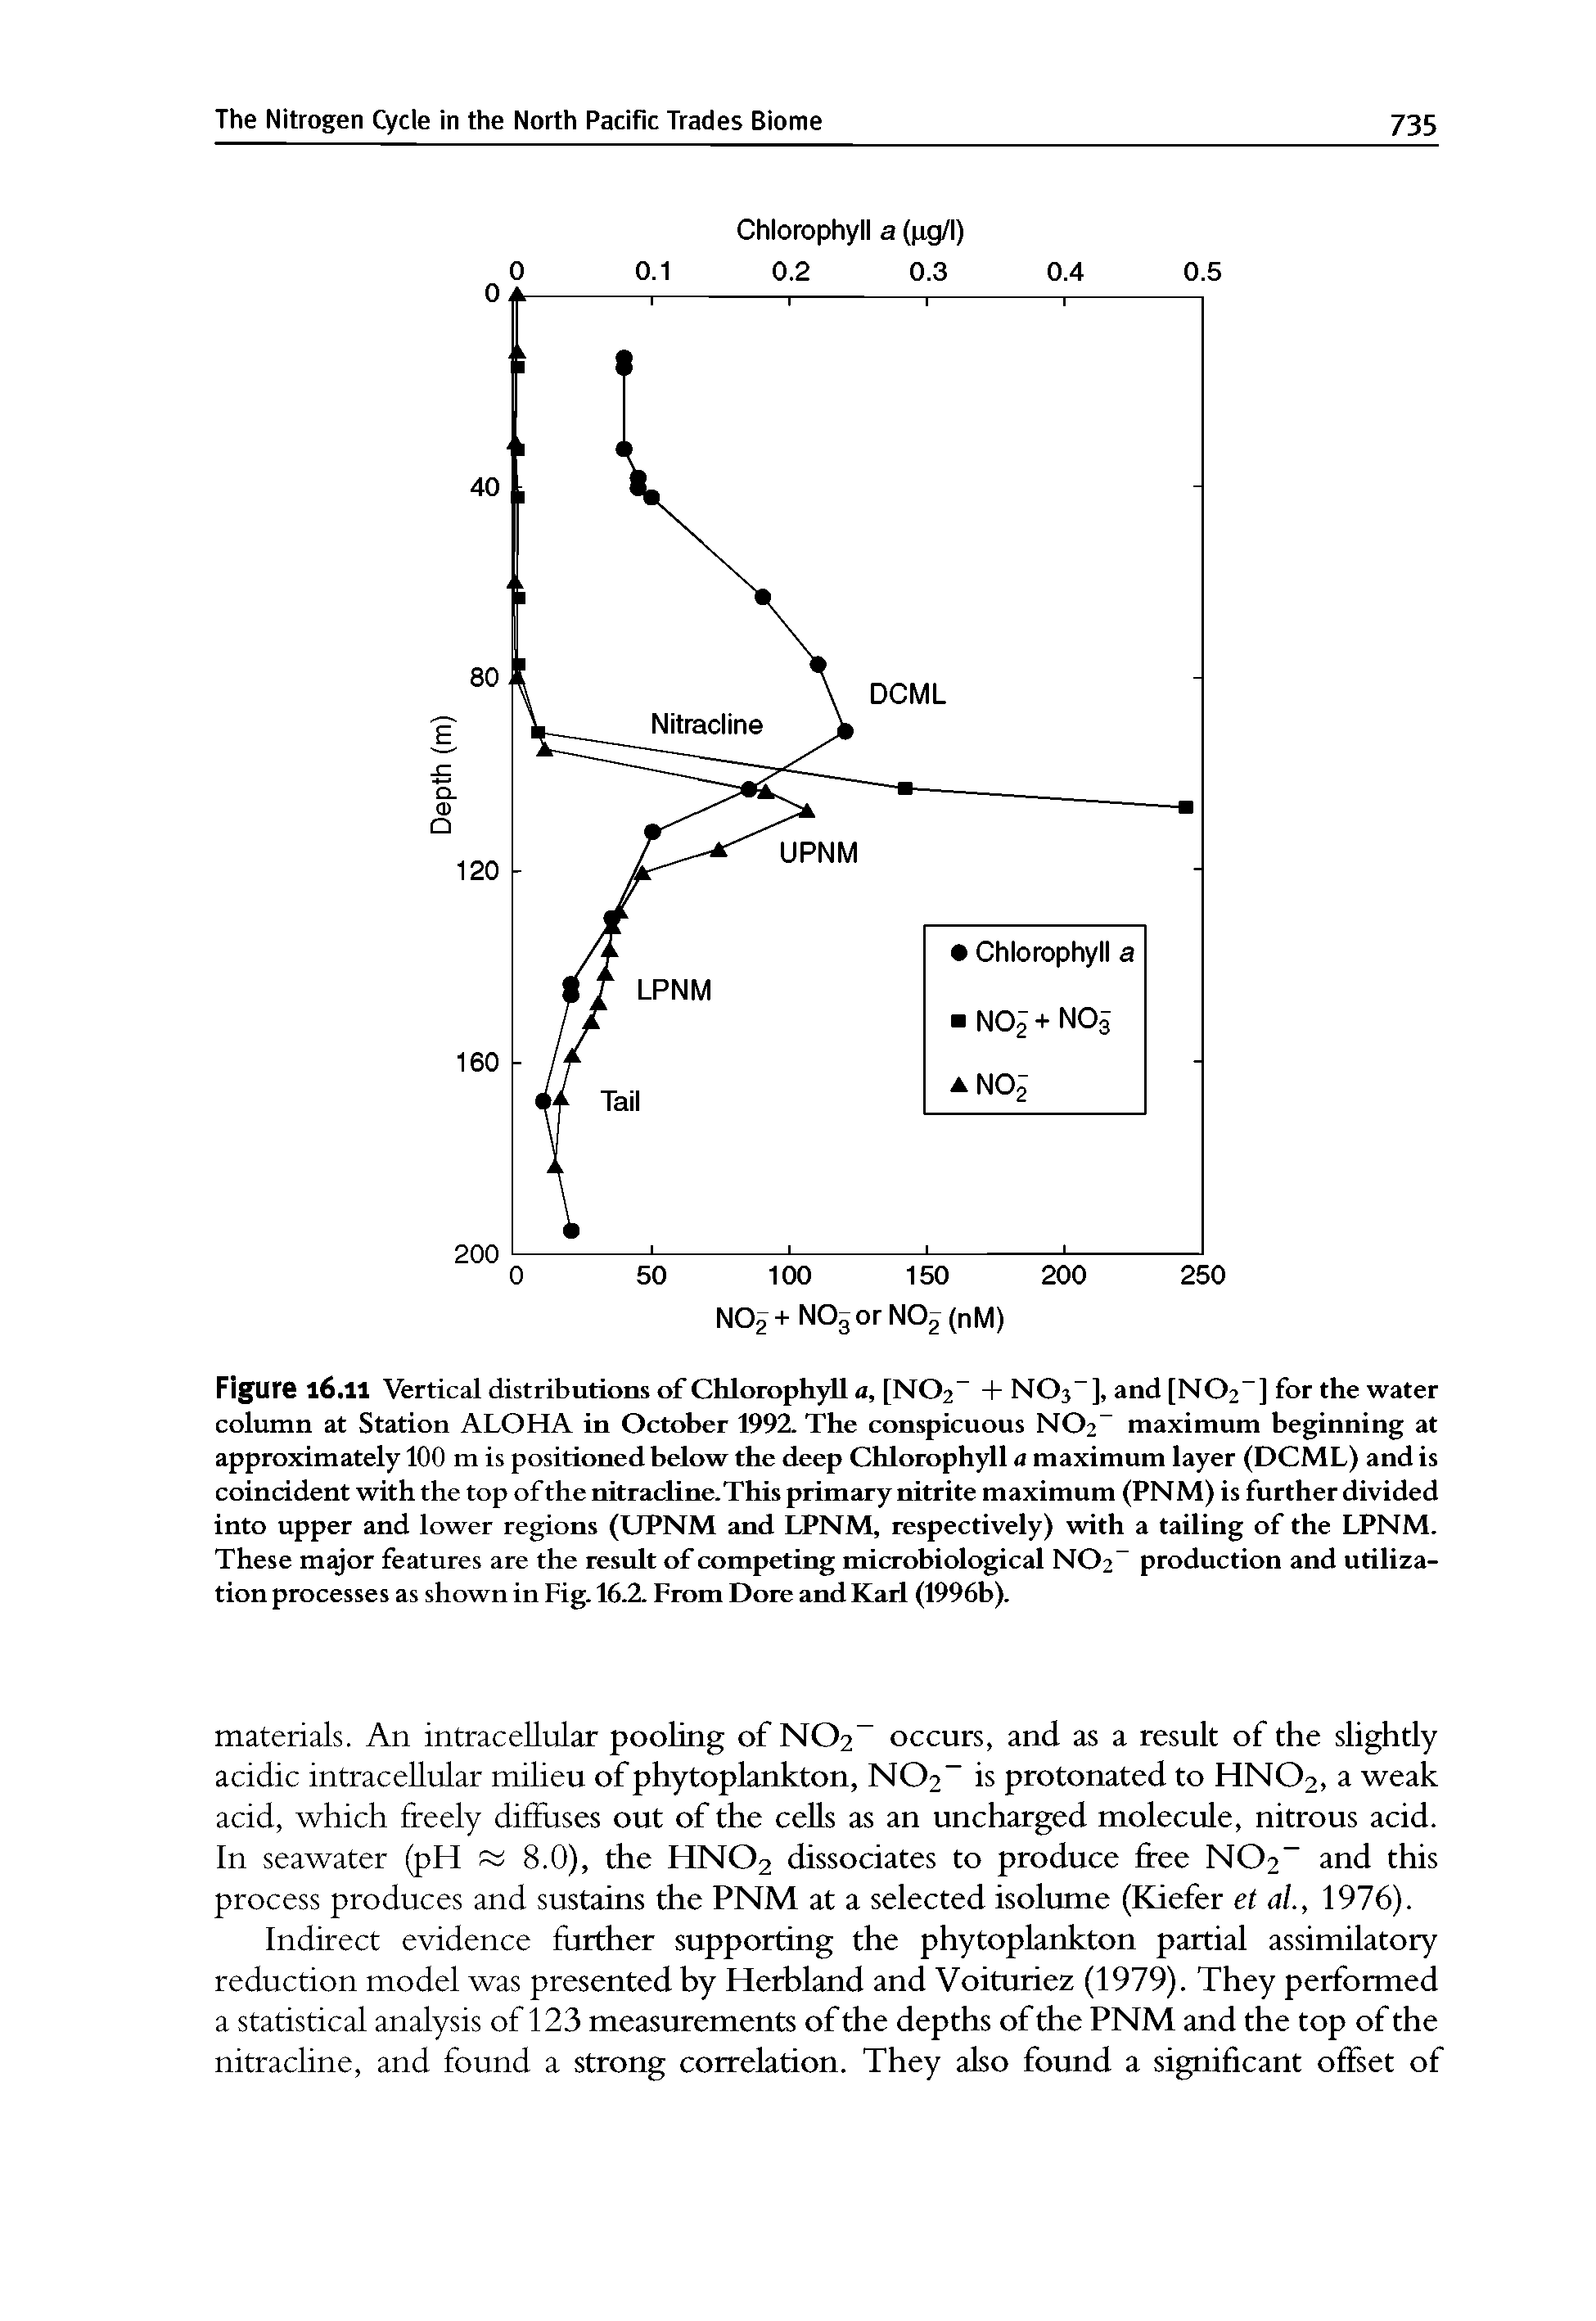 Figure l6.11 Vertical distributions of Chlorophyll a, [N02 + NOs ], and [N02 ] for the water column at Station ALOHA in October 1992. The conspicuous N02 maximum beginning at approximately 100 m is positioned below the deep Chlorophyll a maximum layer (DCML) and is coincident with the top of the nitracline.This primary nitrite maximum (PN M) is further divided into upper and lower regions (UPNM and LPNM, respectively) with a tailing of the LPNM. These m or features are the result of competing microbiological N02 production and utilization processes as shown in Fig. 16.2. From Dore and Karl (1996b).